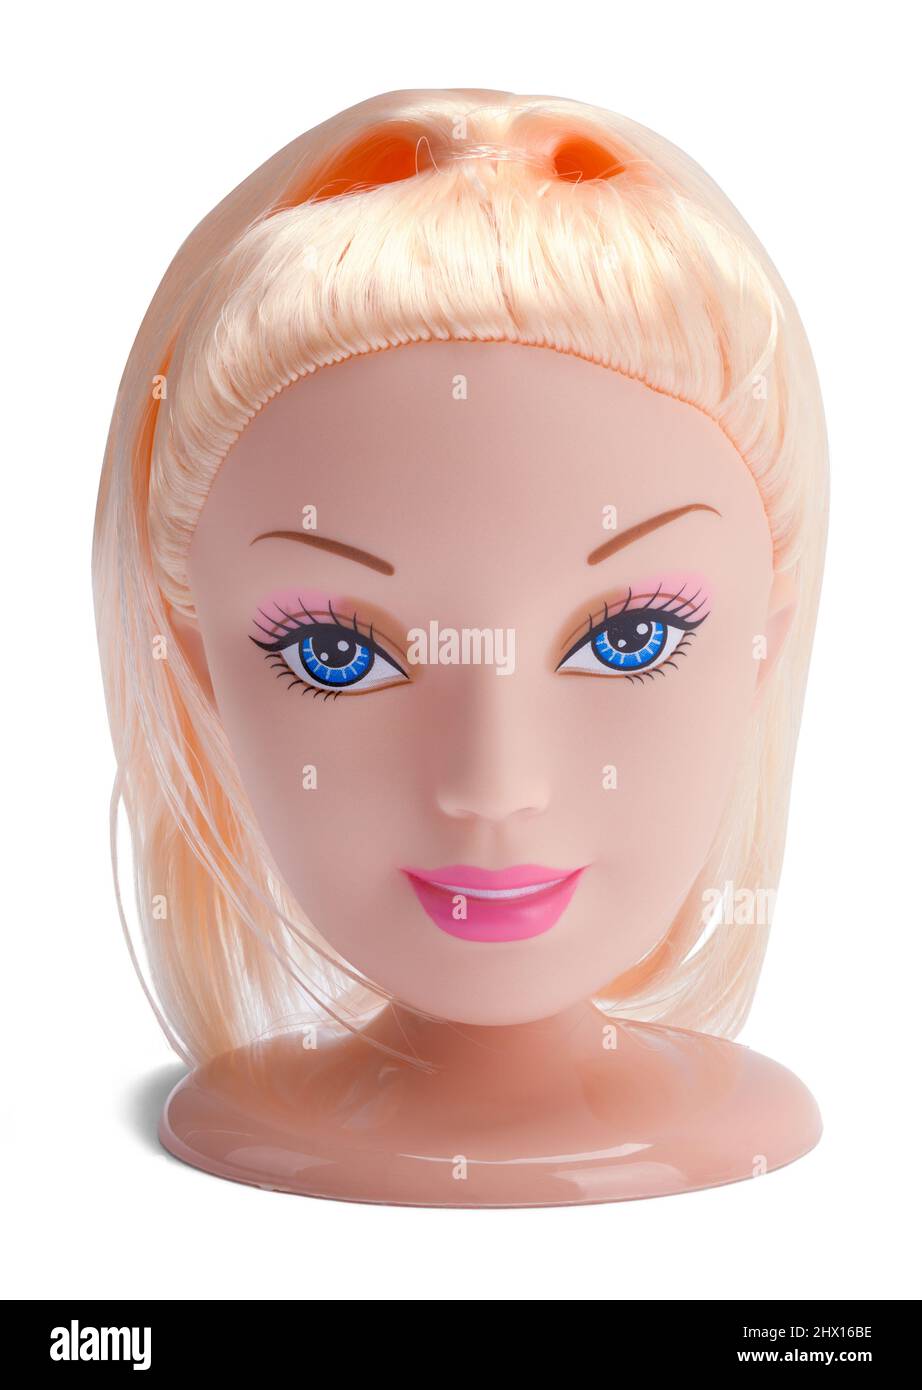 Blond Hair Doll Toy Head Cut Out on White. Stock Photo